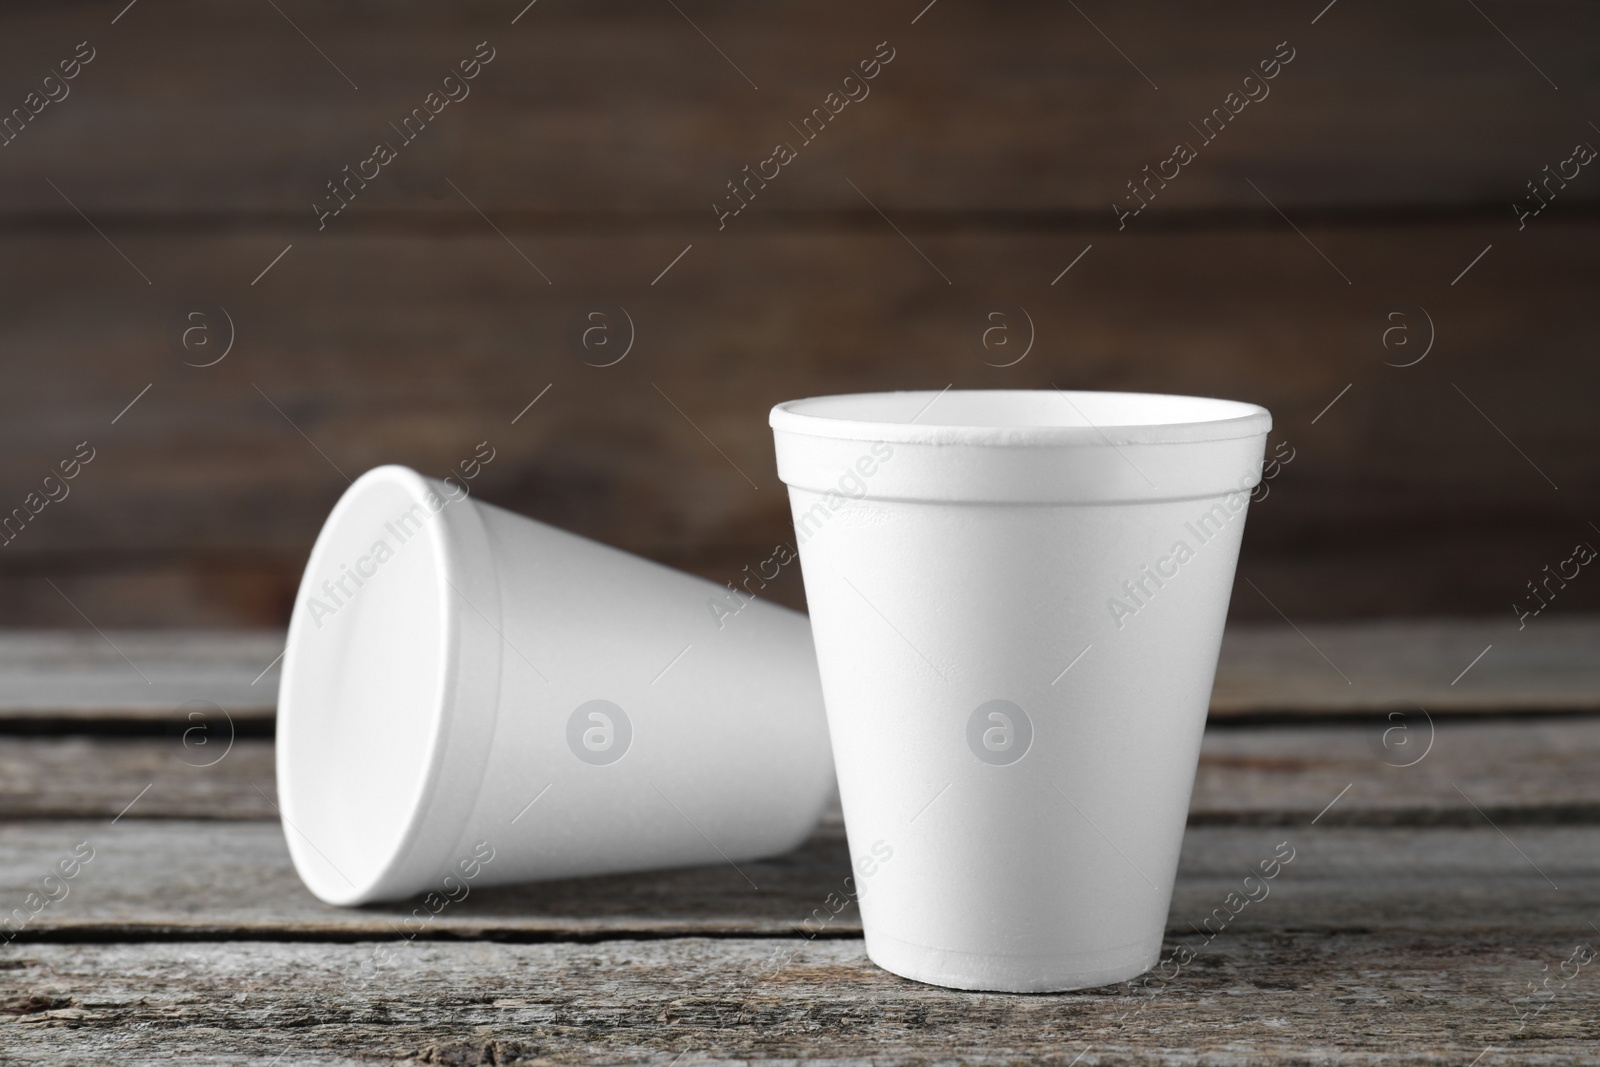 Photo of Two white styrofoam cups on wooden table, closeup